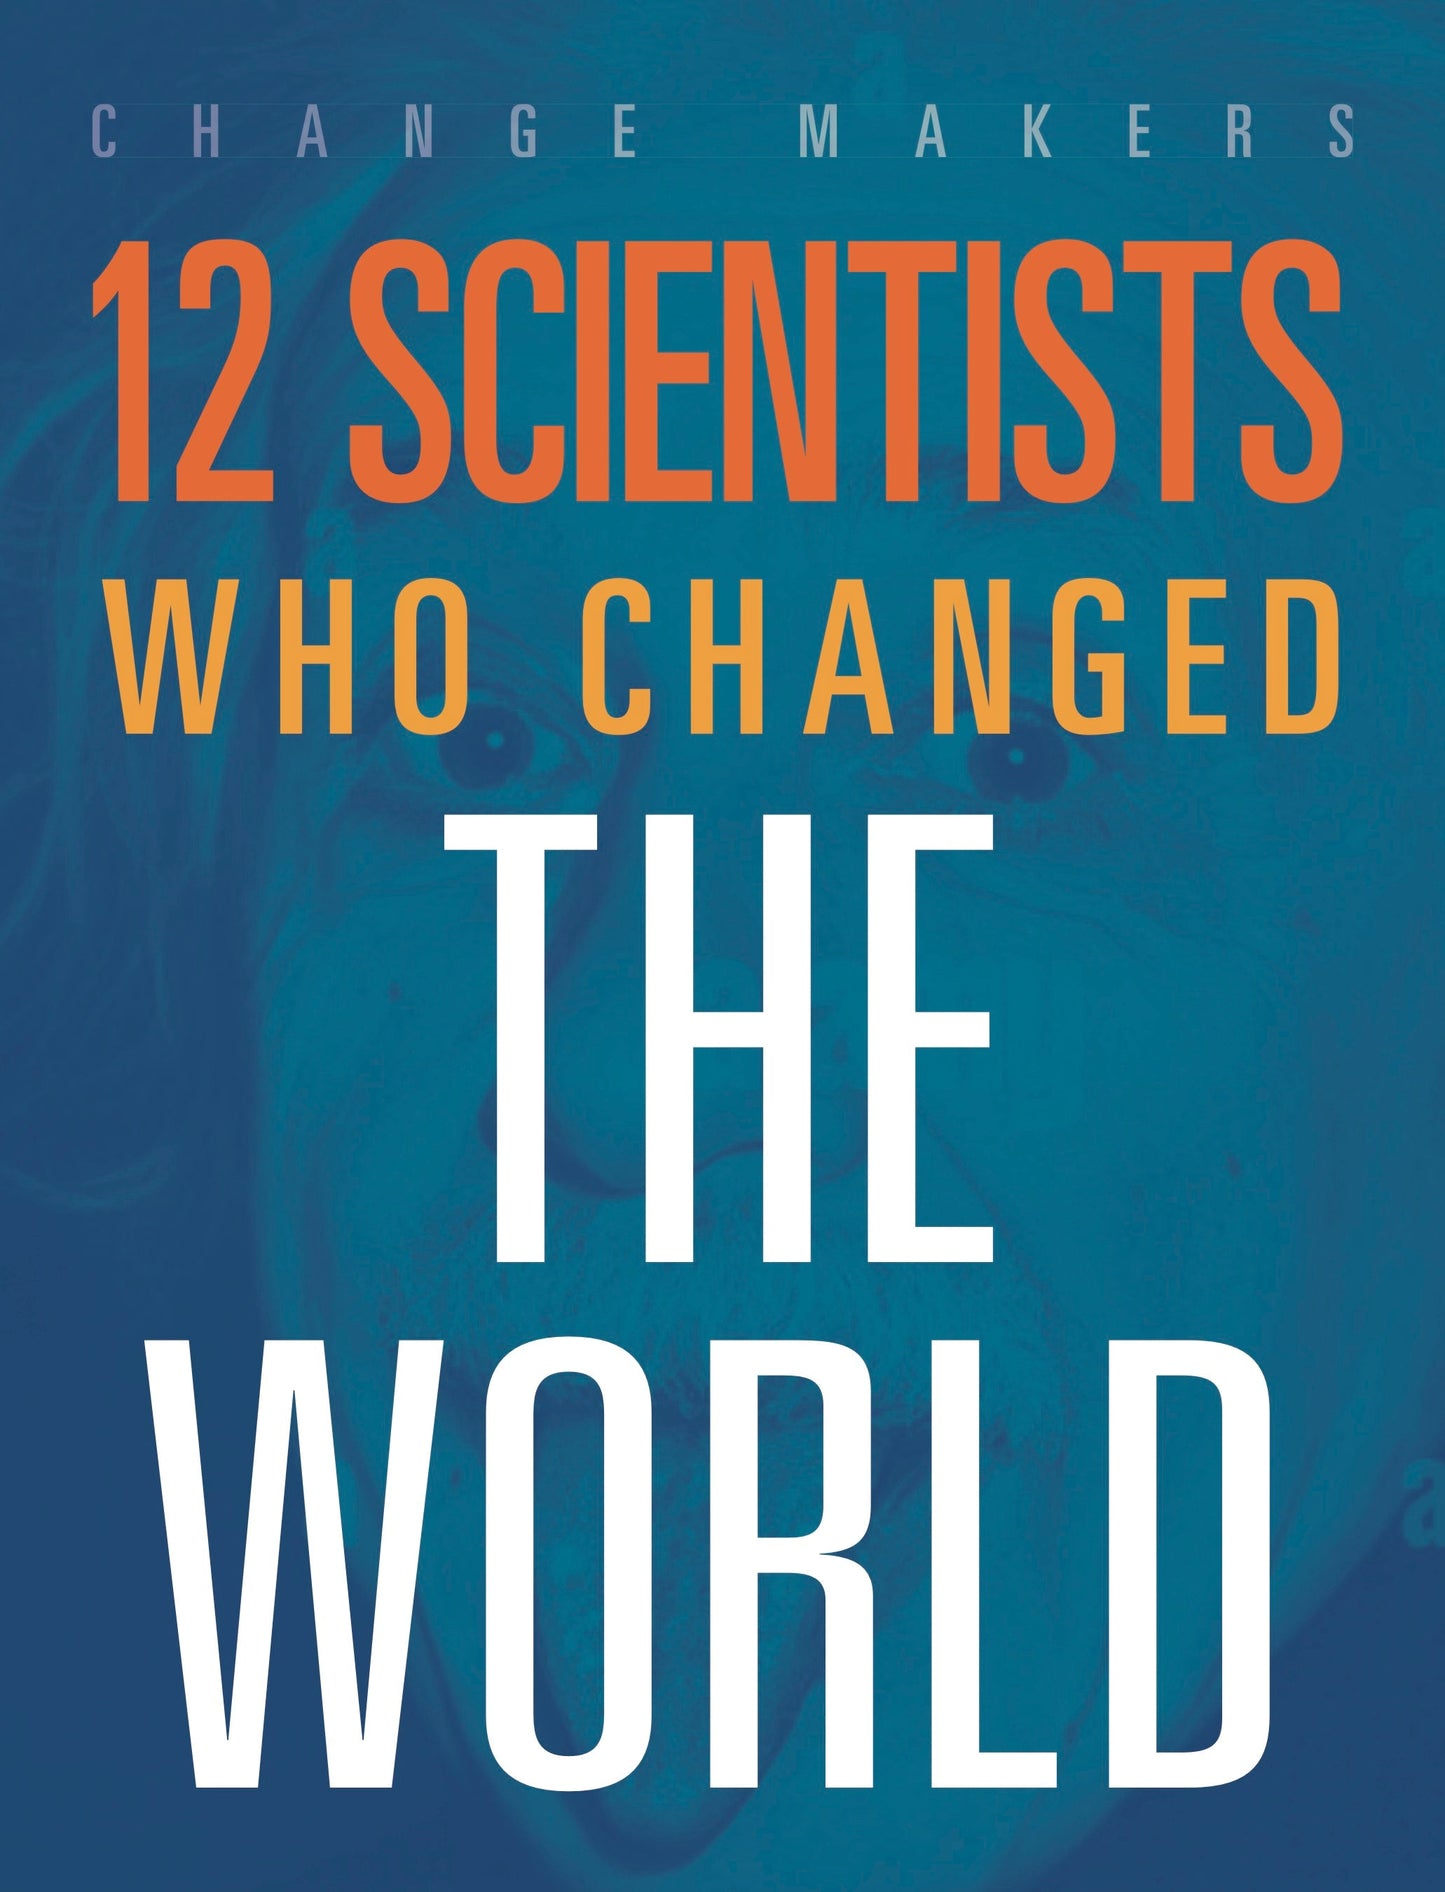 Change Makers: 12 Scientists Who Changed the World